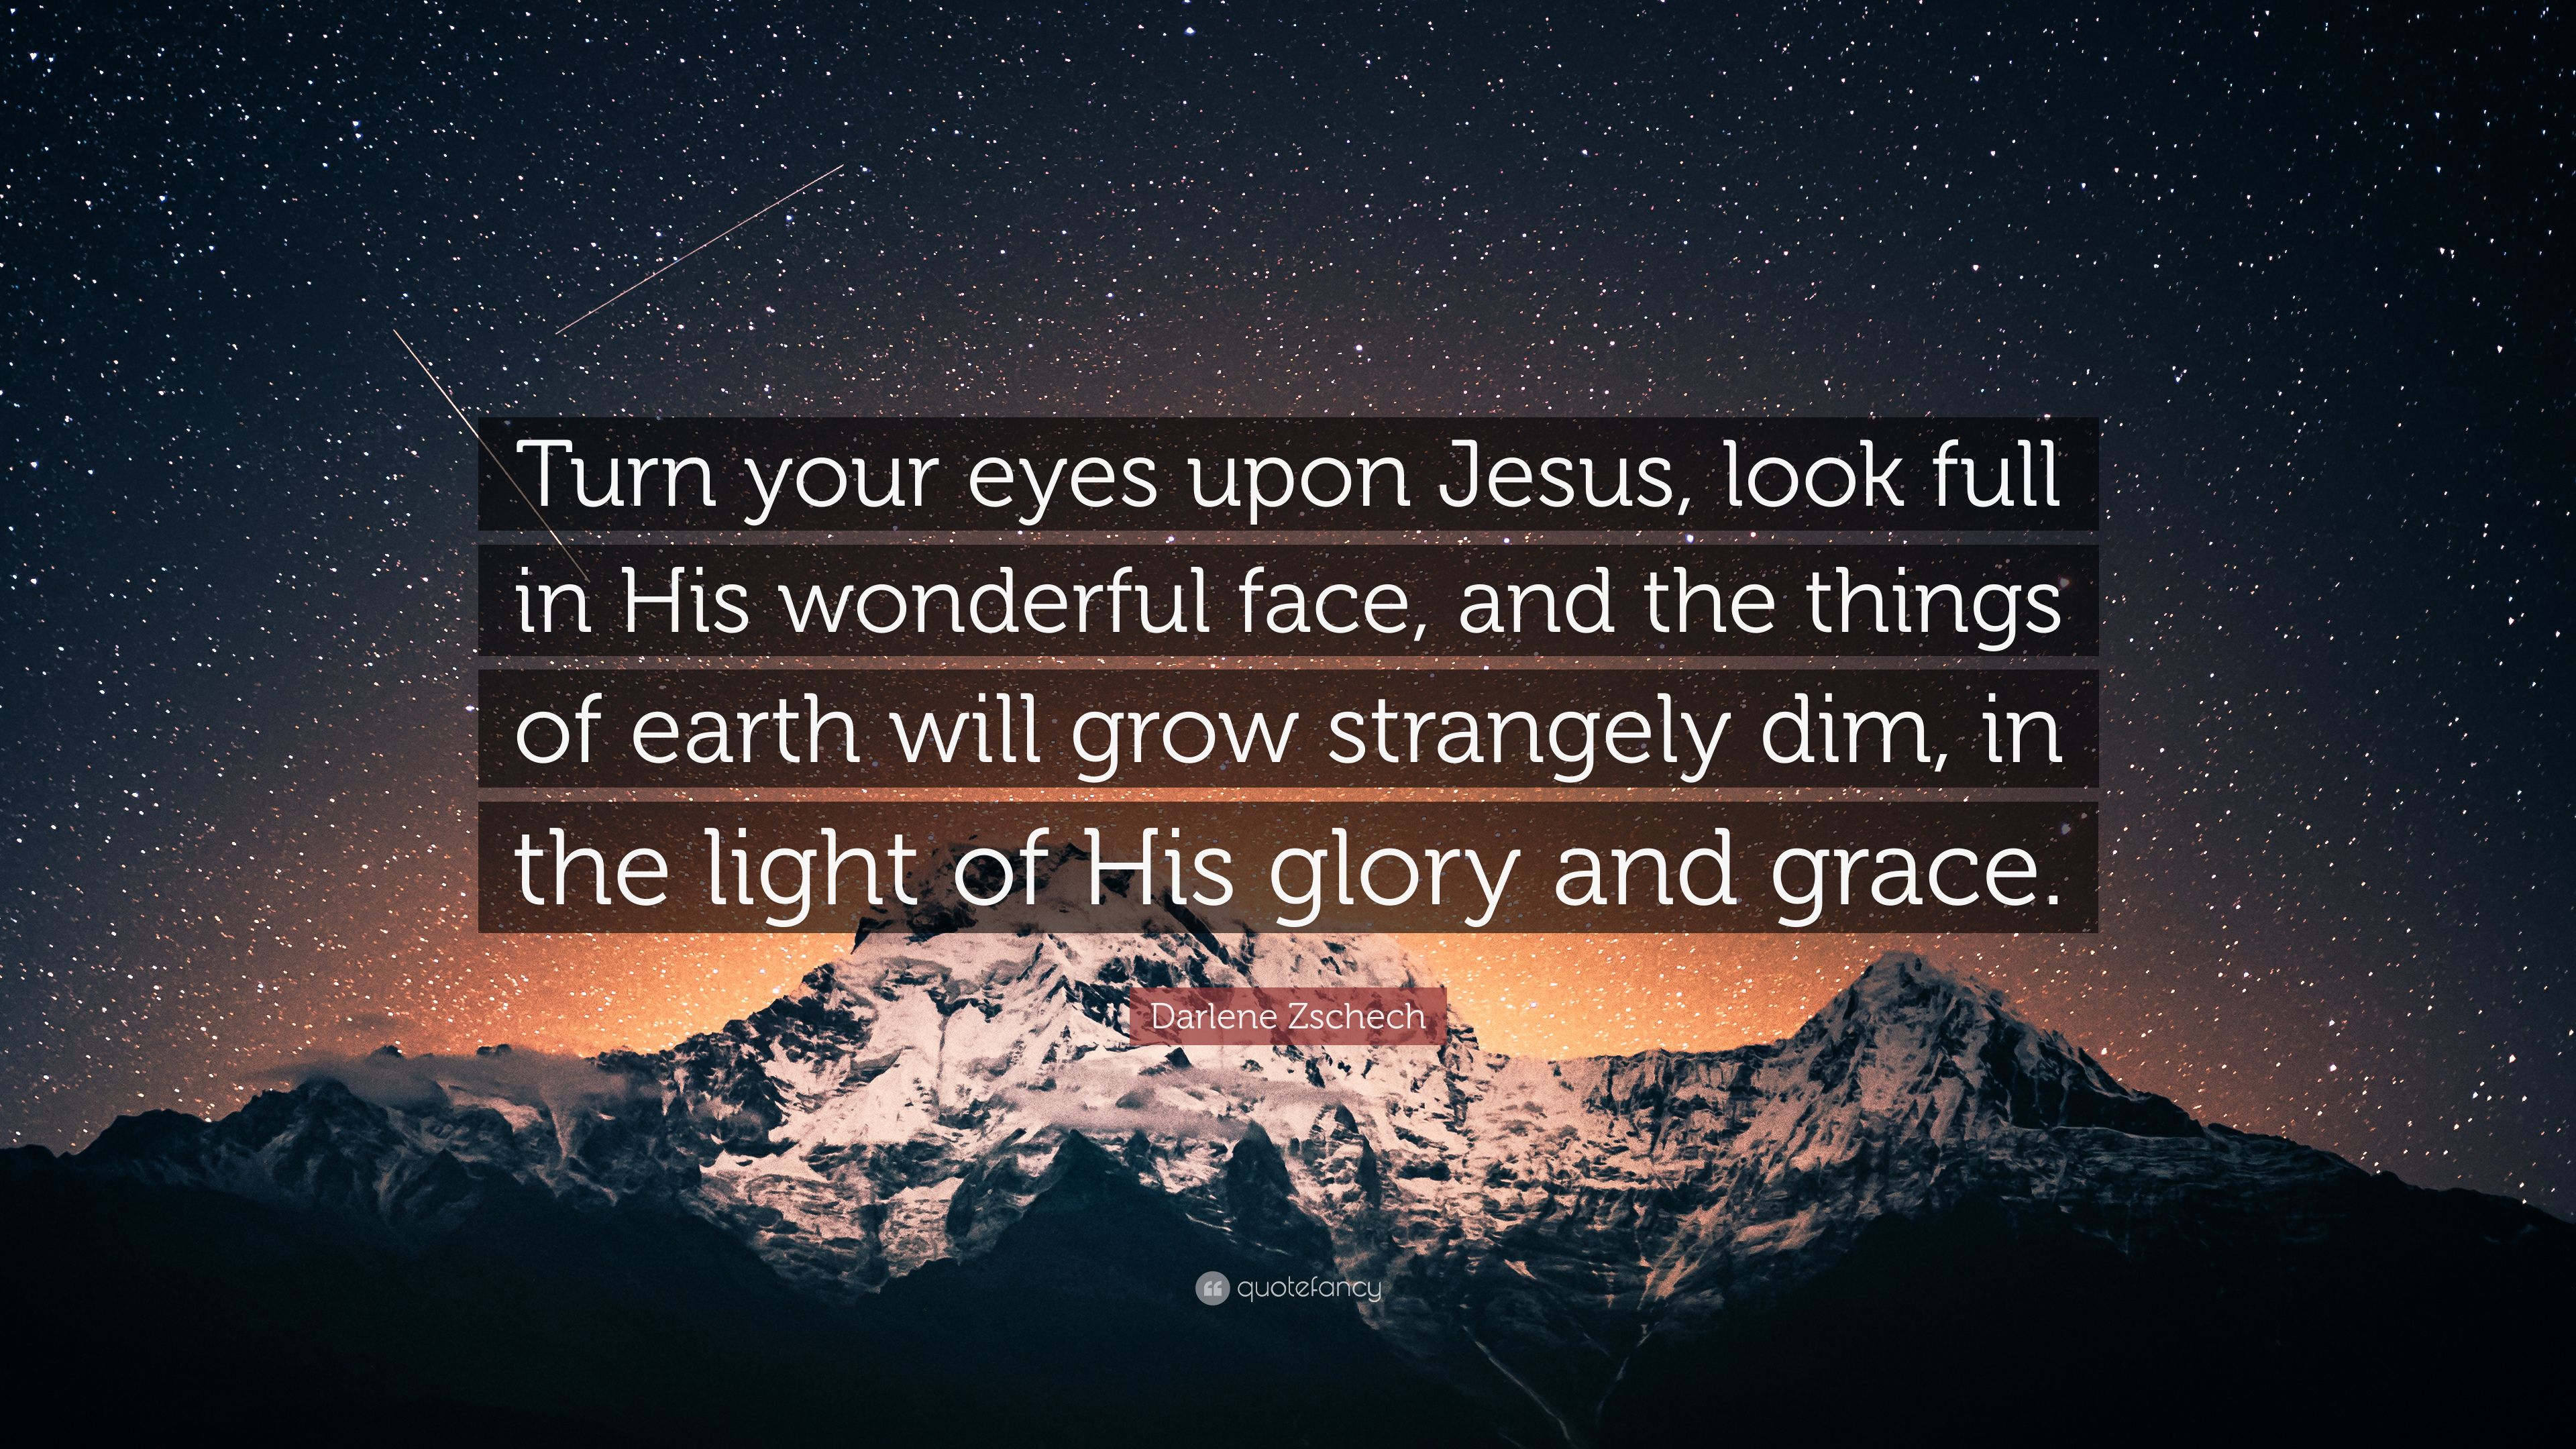 Darlene Zschech Quote: “Turn your eyes upon Jesus, look full in His